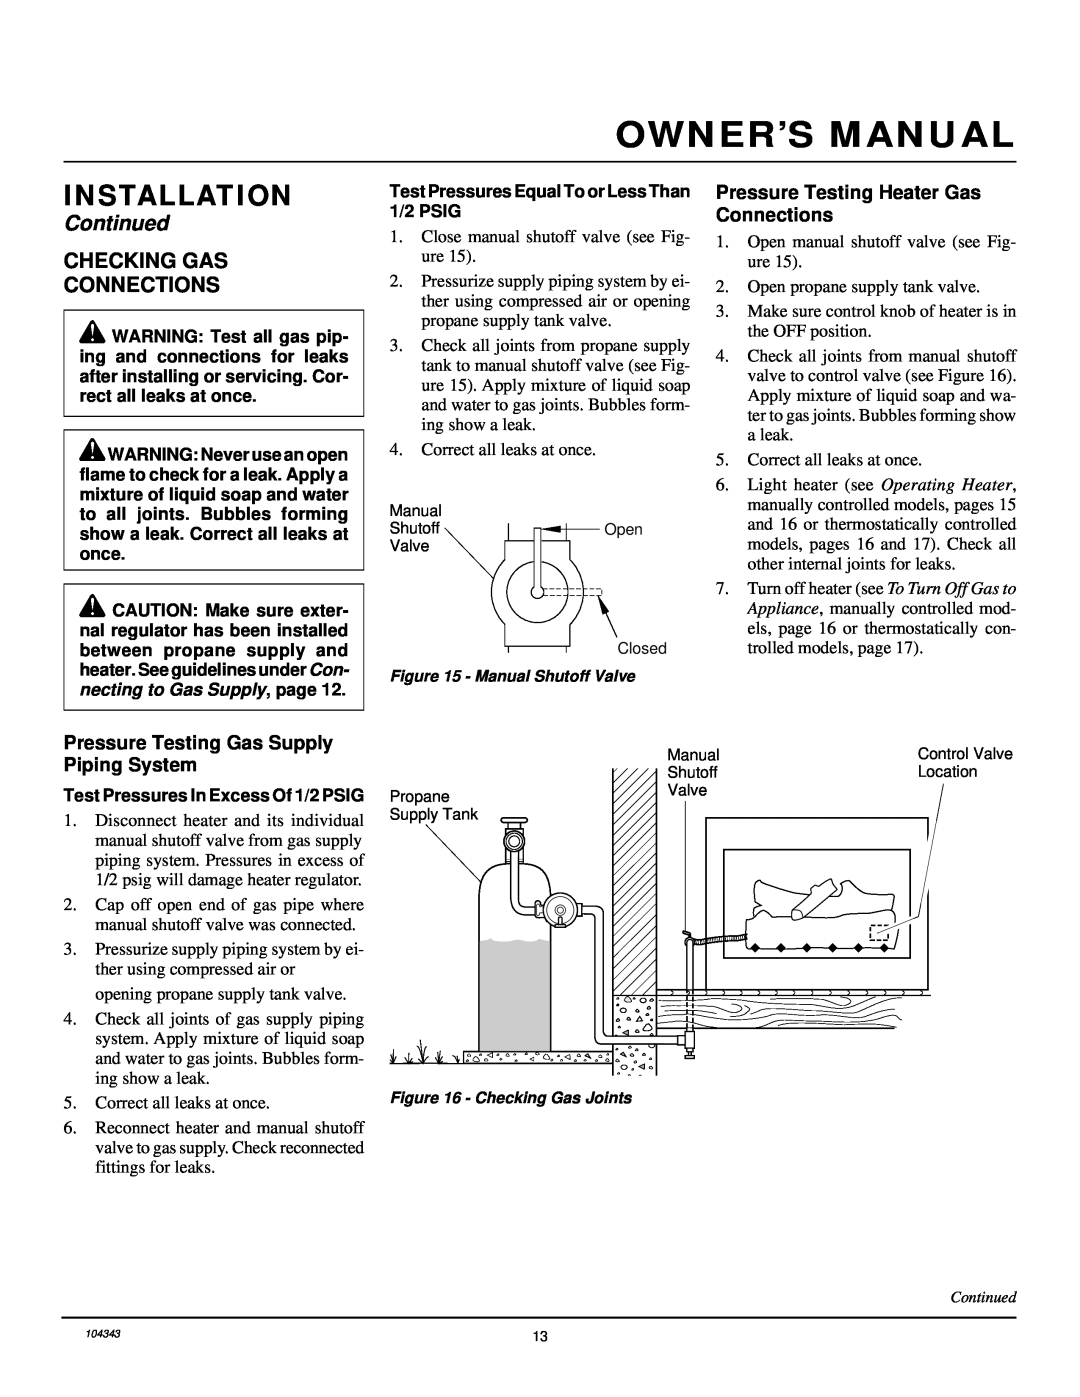 Vanguard Managed Solutions PRVYS18PWA Checking Gas Connections, Pressure Testing Heater Gas Connections, Owner’S Manual 